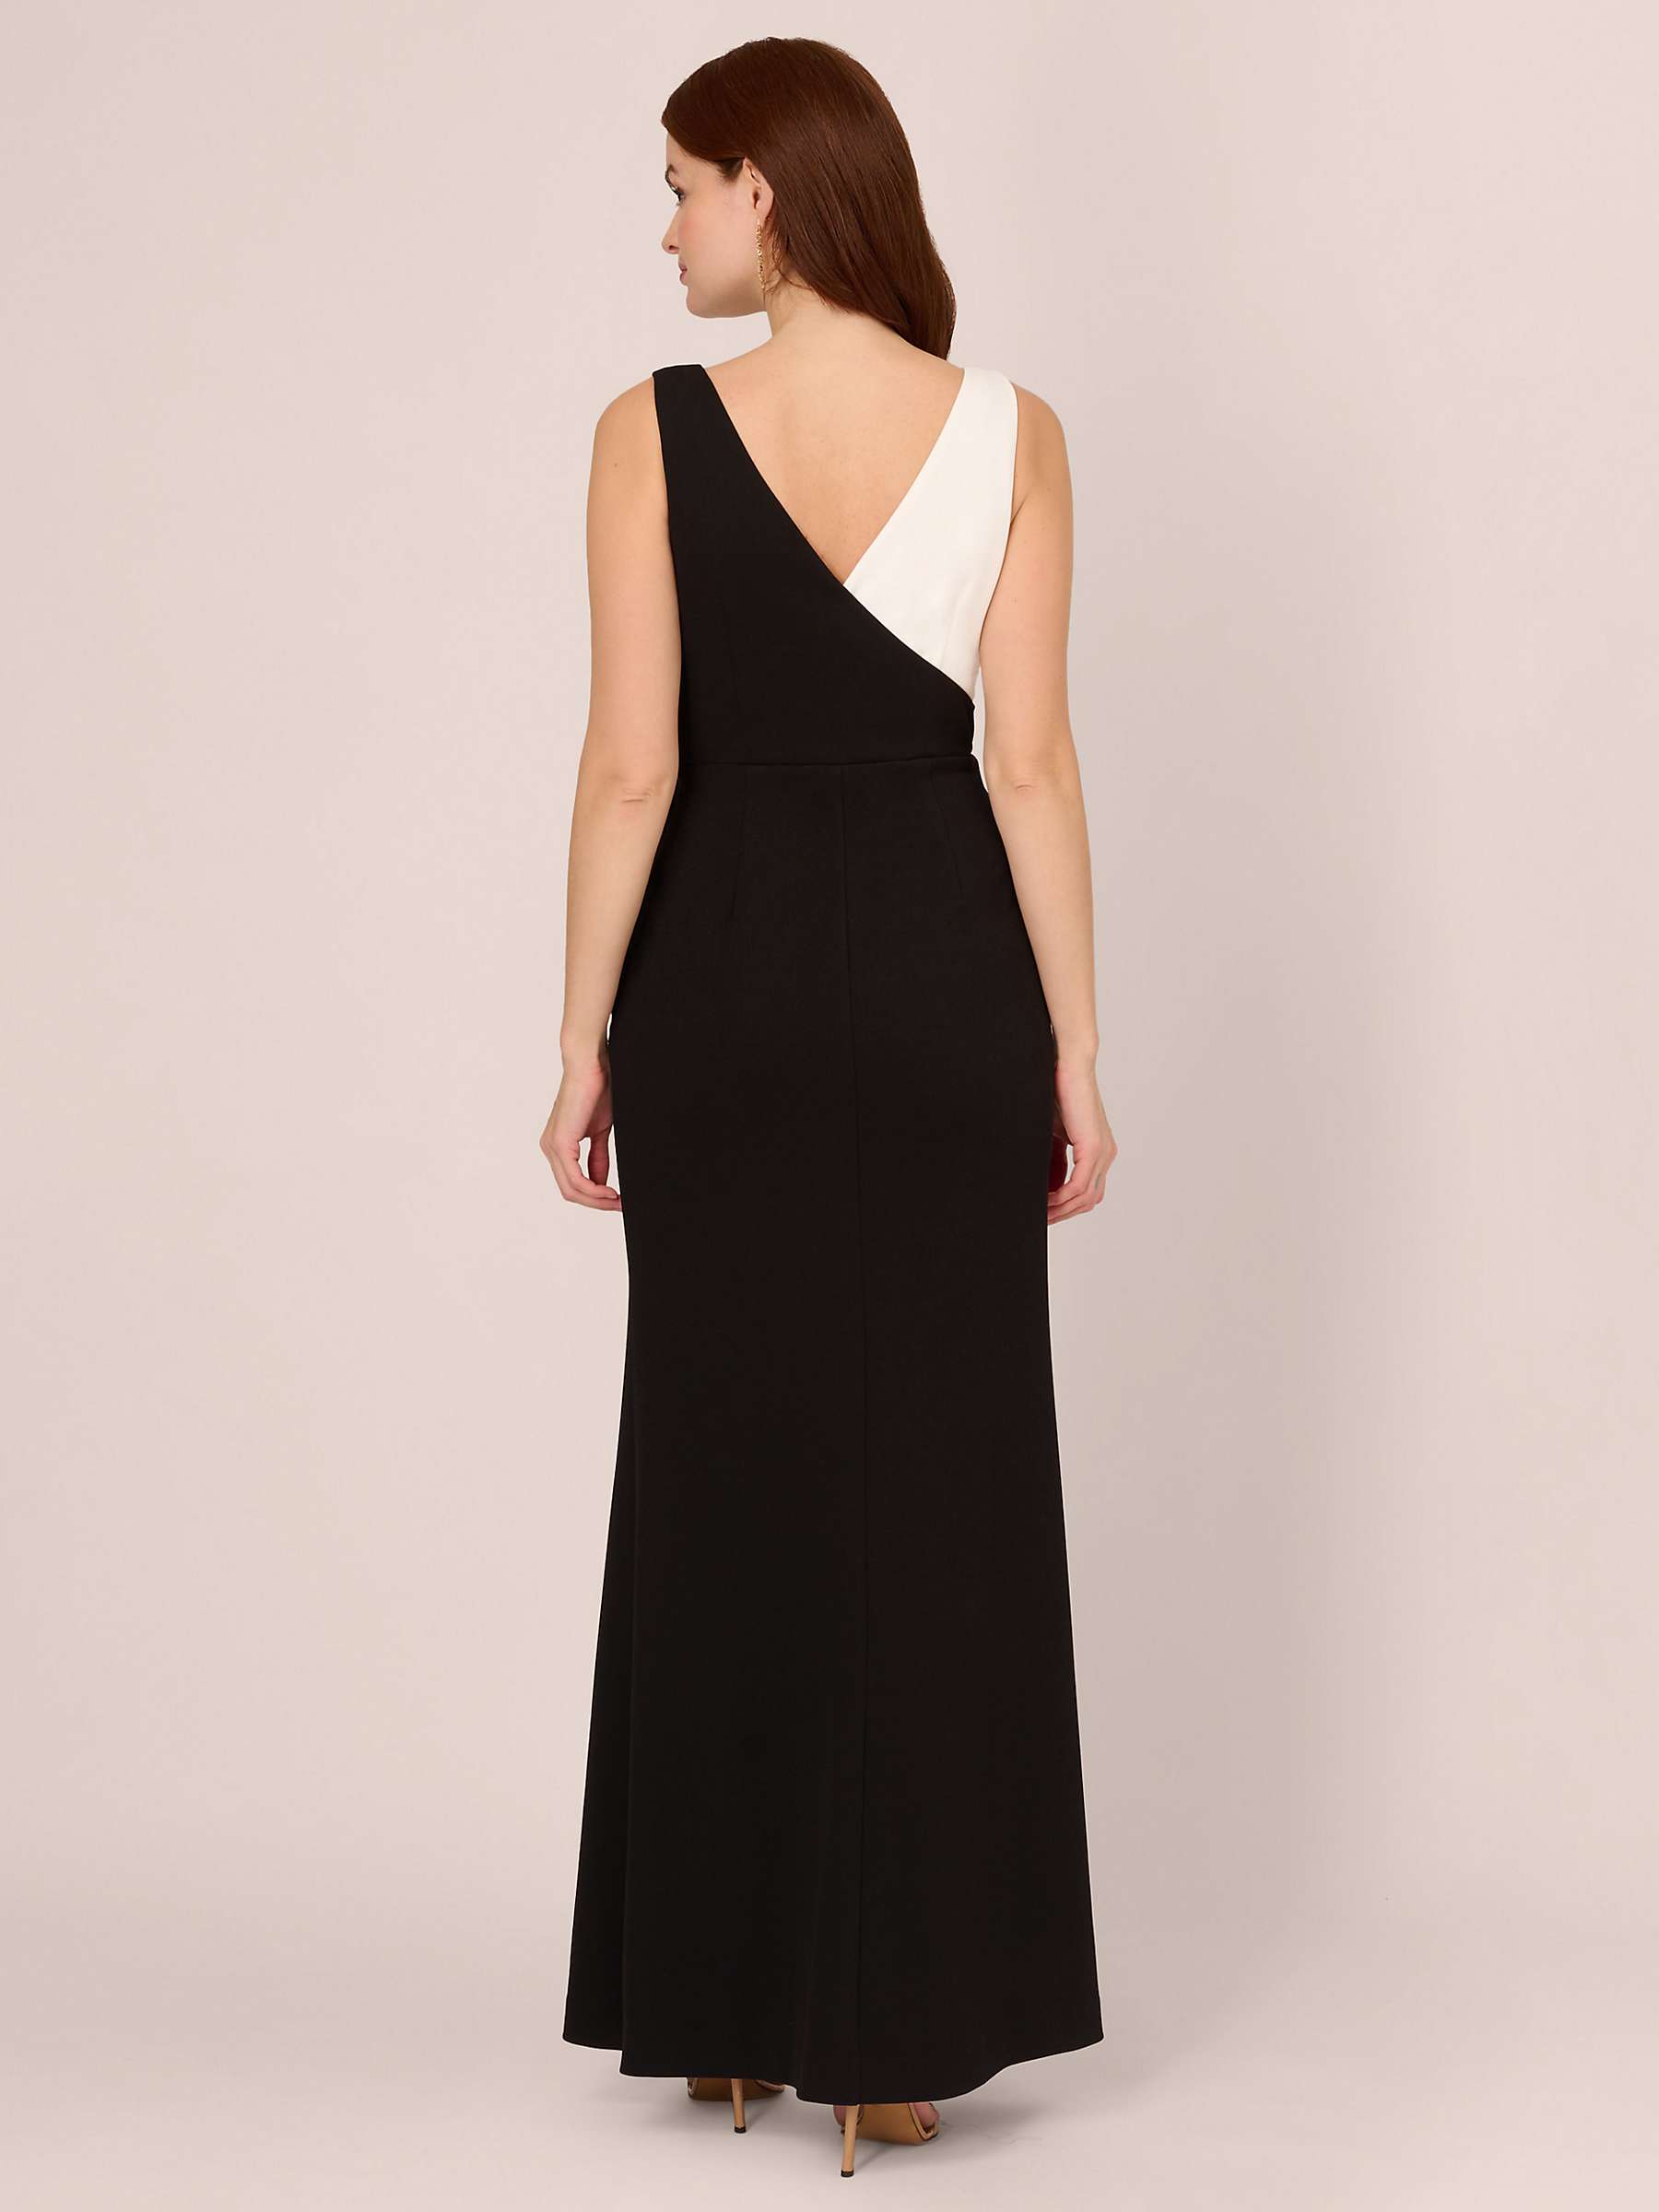 Buy Adrianna Papell Colour Block Maxi Dress, Black/Ivory Online at johnlewis.com